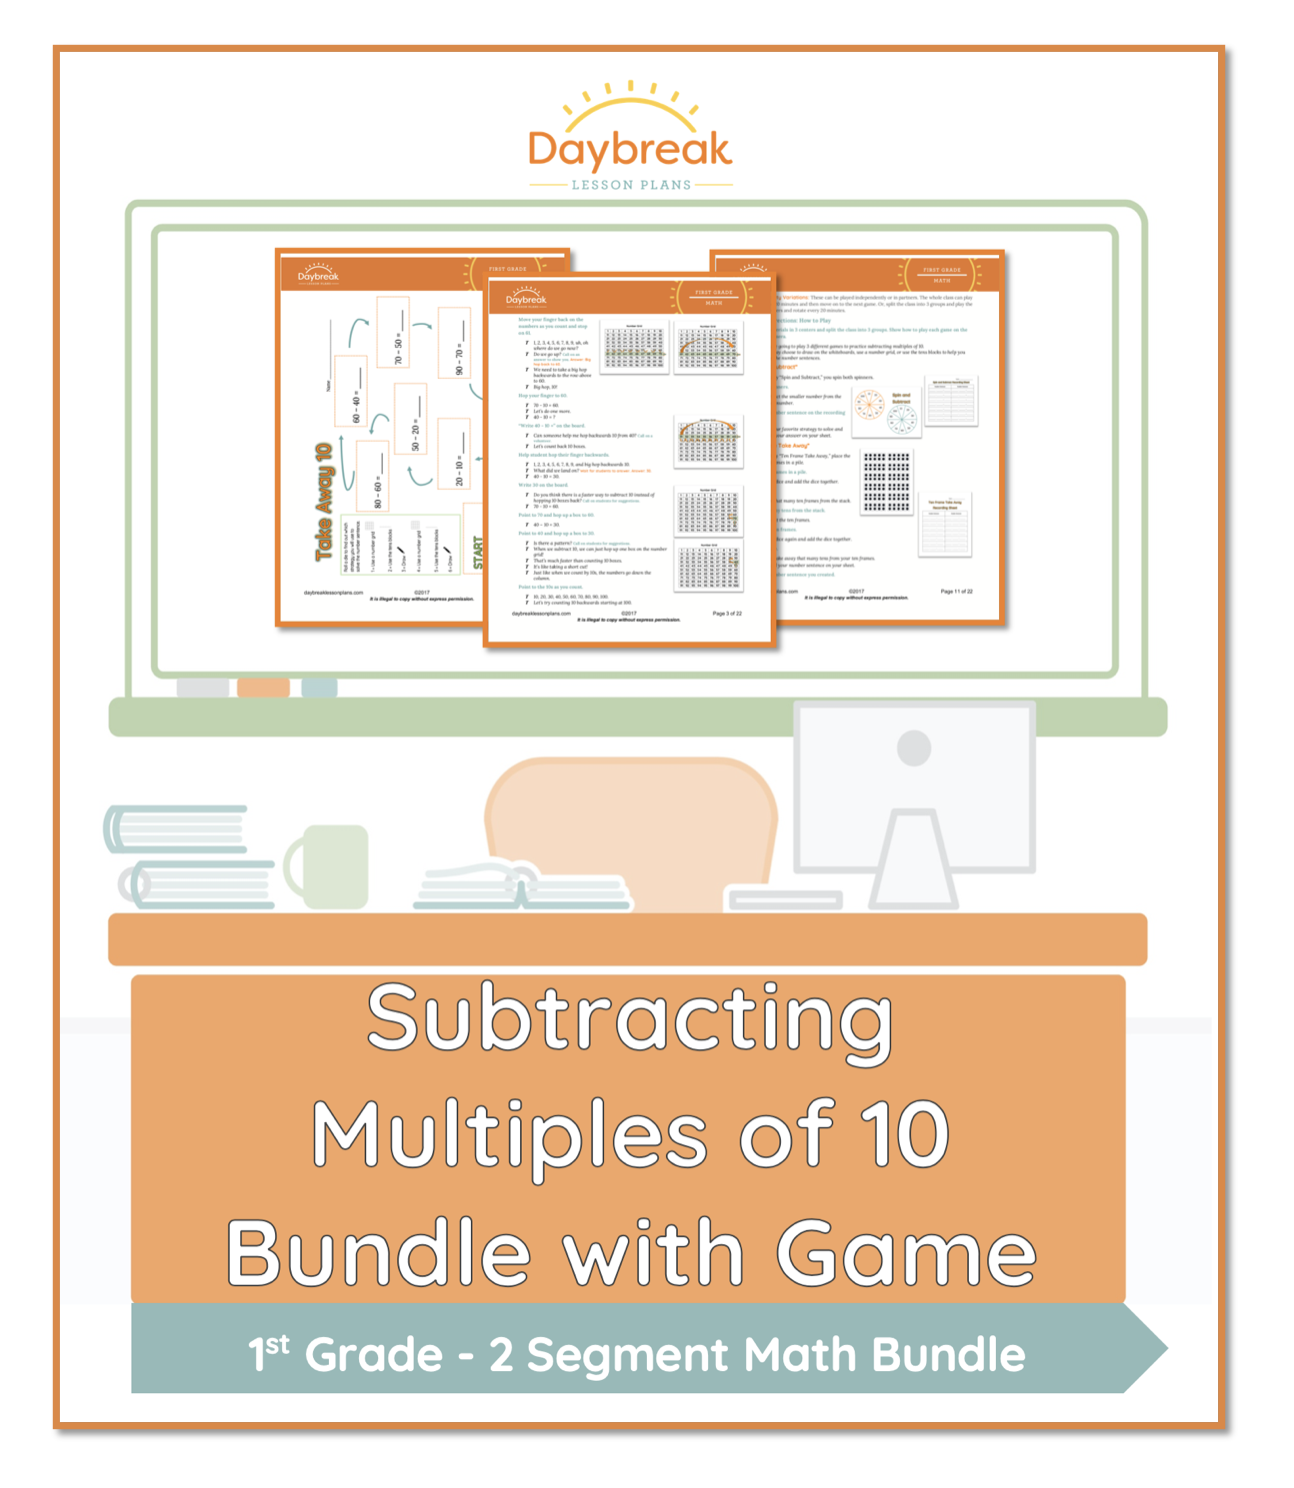 subtracting-multiples-of-10-bundle-with-game-daybreak-lessons-multiples-tens-mental-math